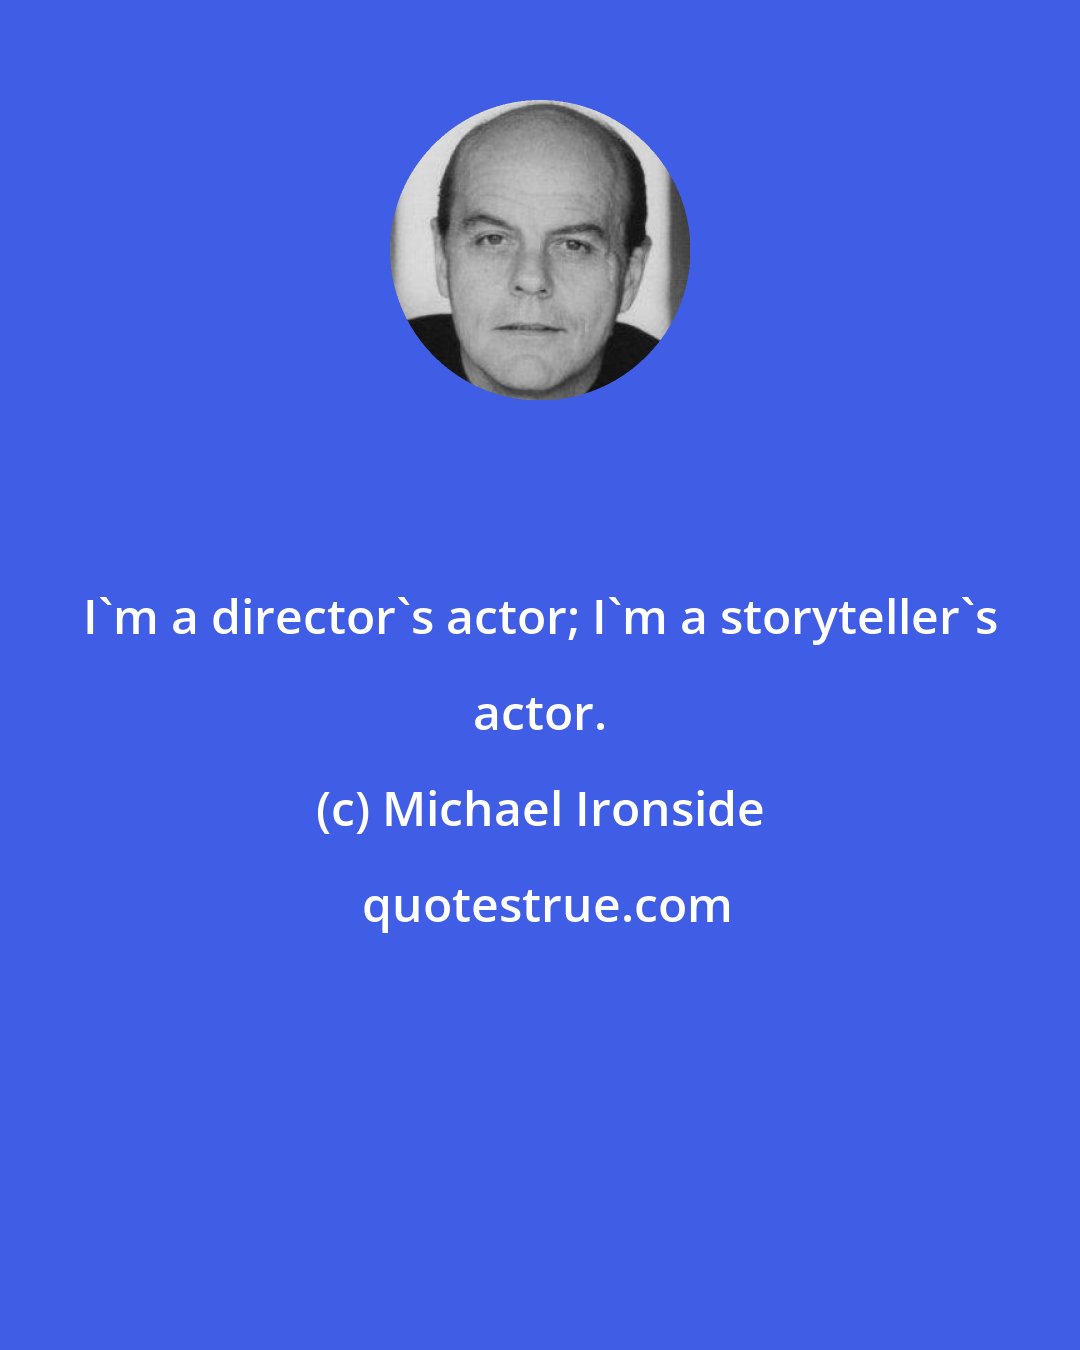 Michael Ironside: I'm a director's actor; I'm a storyteller's actor.